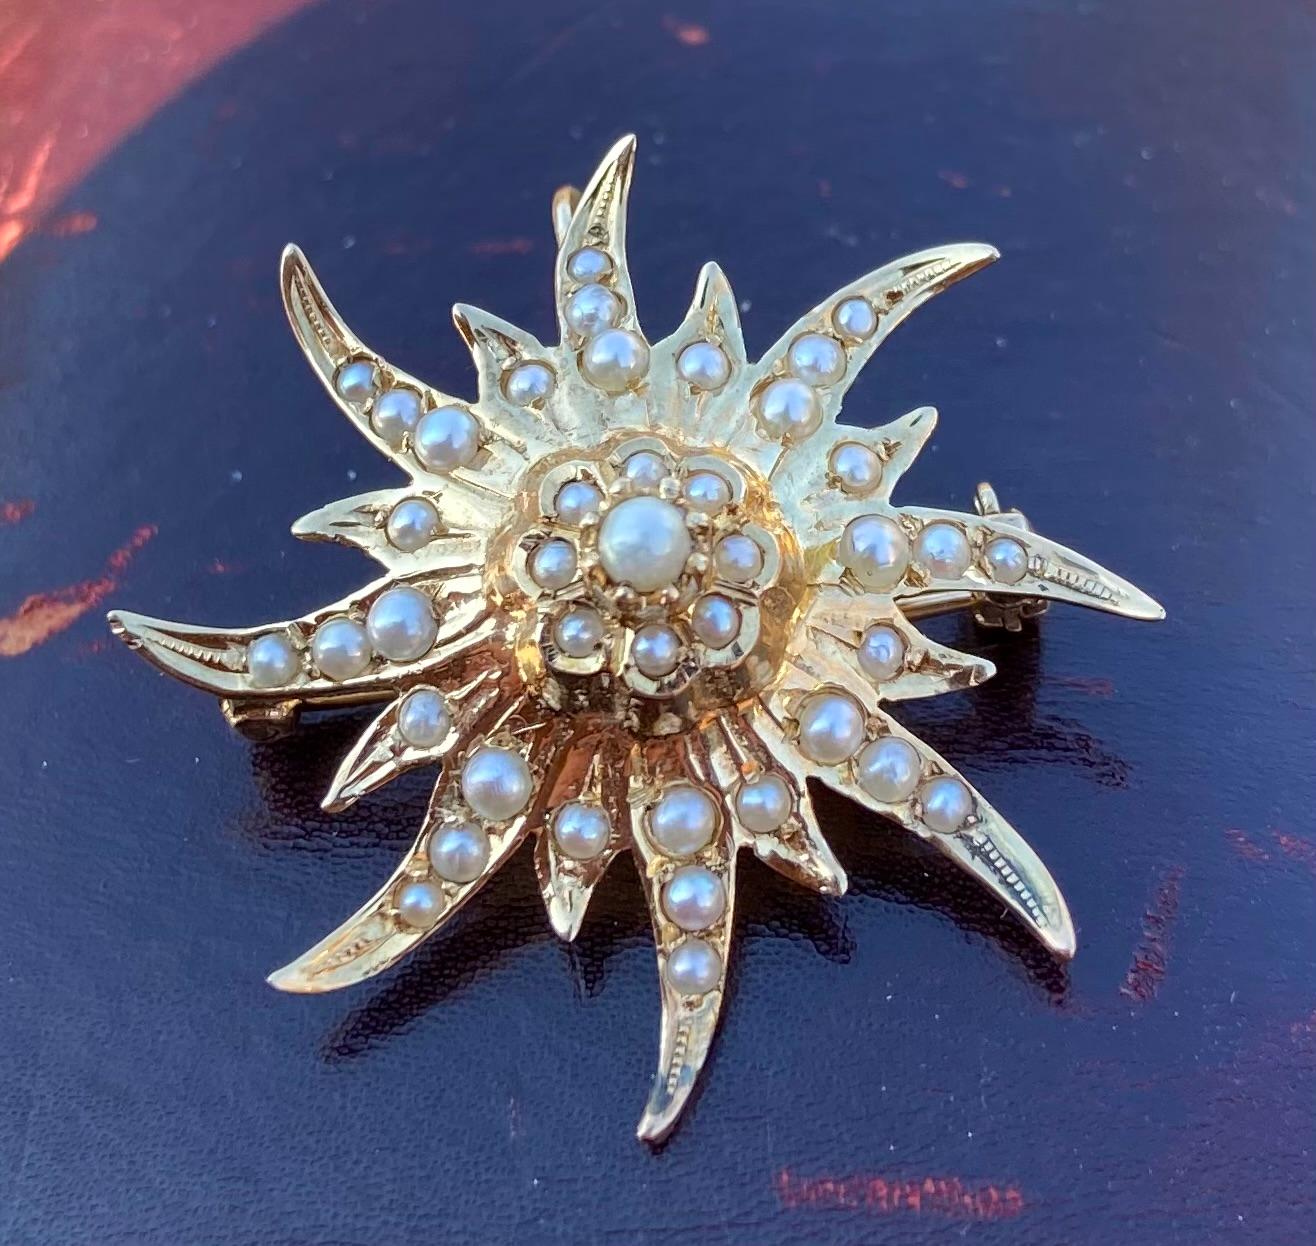 One 14 karat yellow gold (acid tested) Victorian seed pearl starburst design pendant/brooch set with forty-five (45) seed pearls.  The pendant measures 1.25